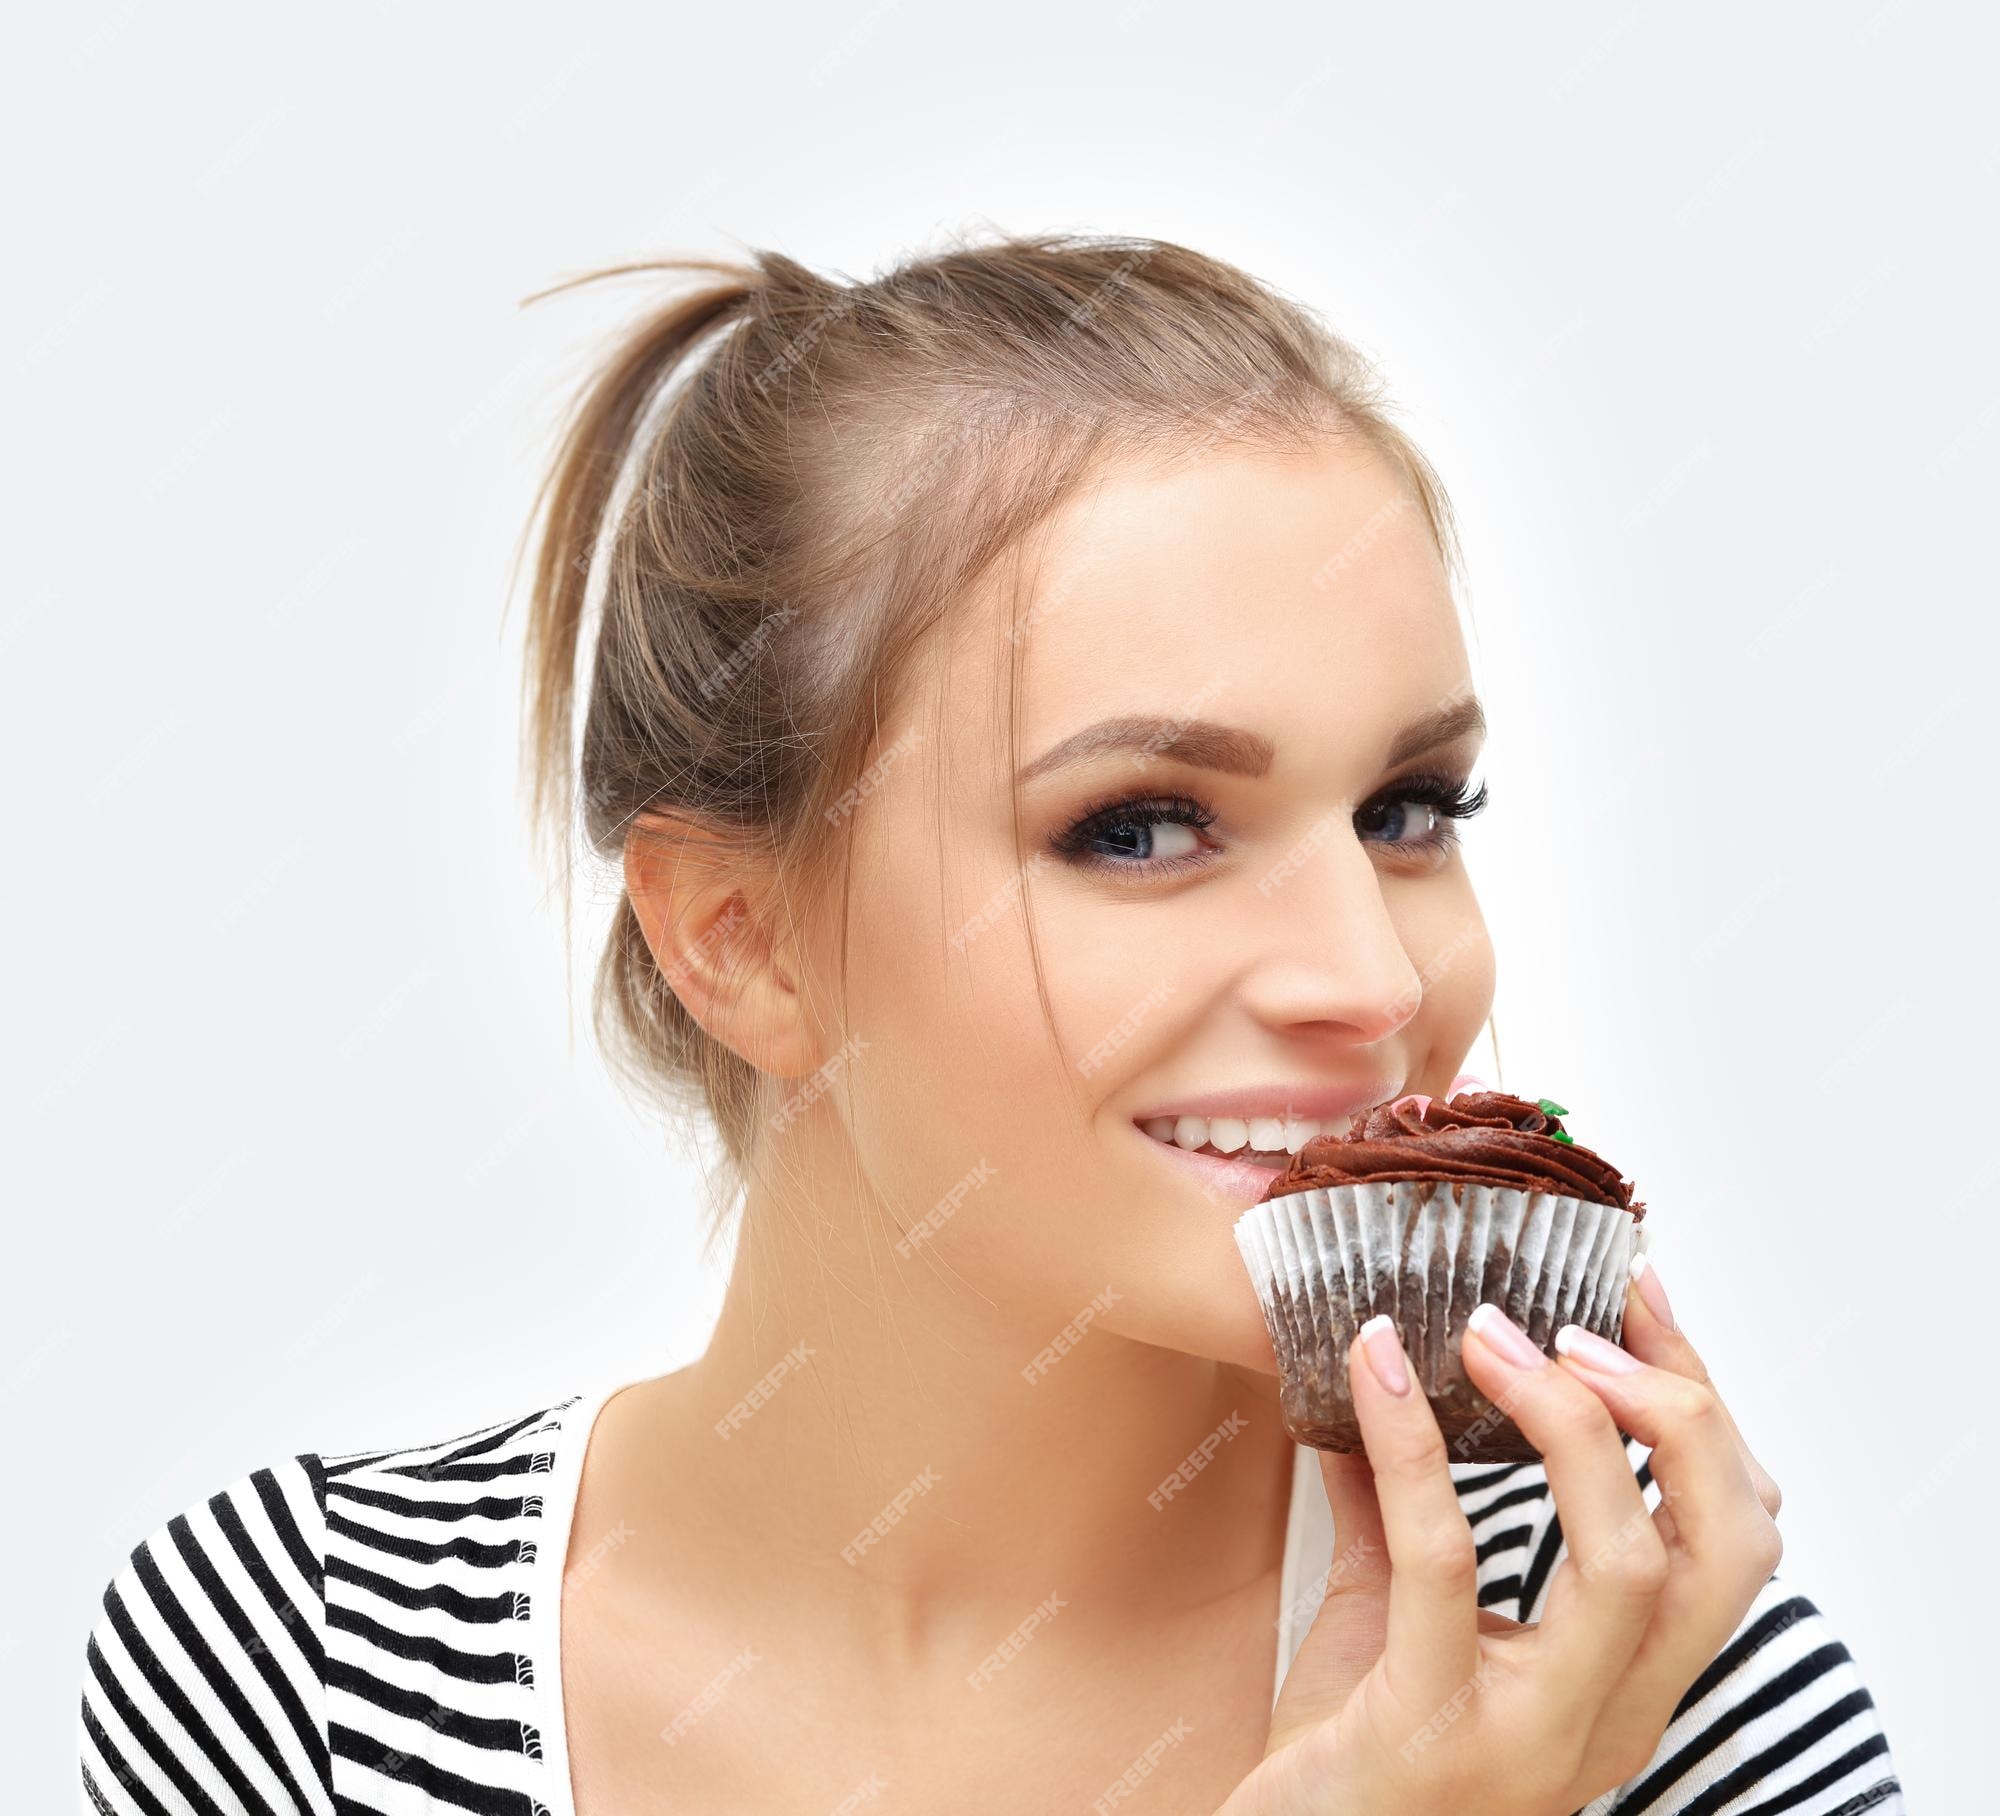 Page 4 | Model Eating Chocolate Images - Free Download on Freepik